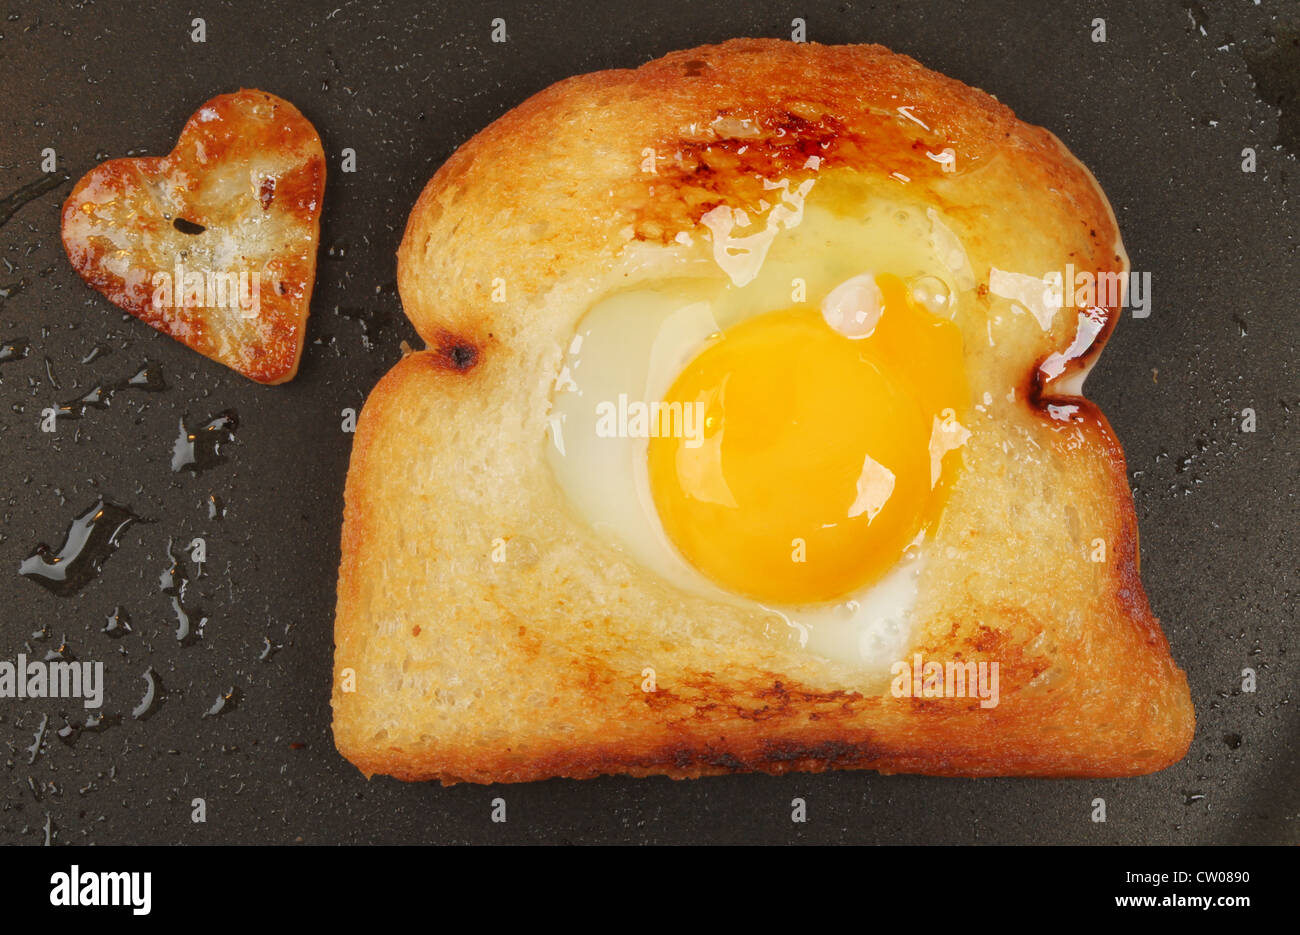 Fried bread with an egg and a heart shaped fried potato in a frying pan Stock Photo